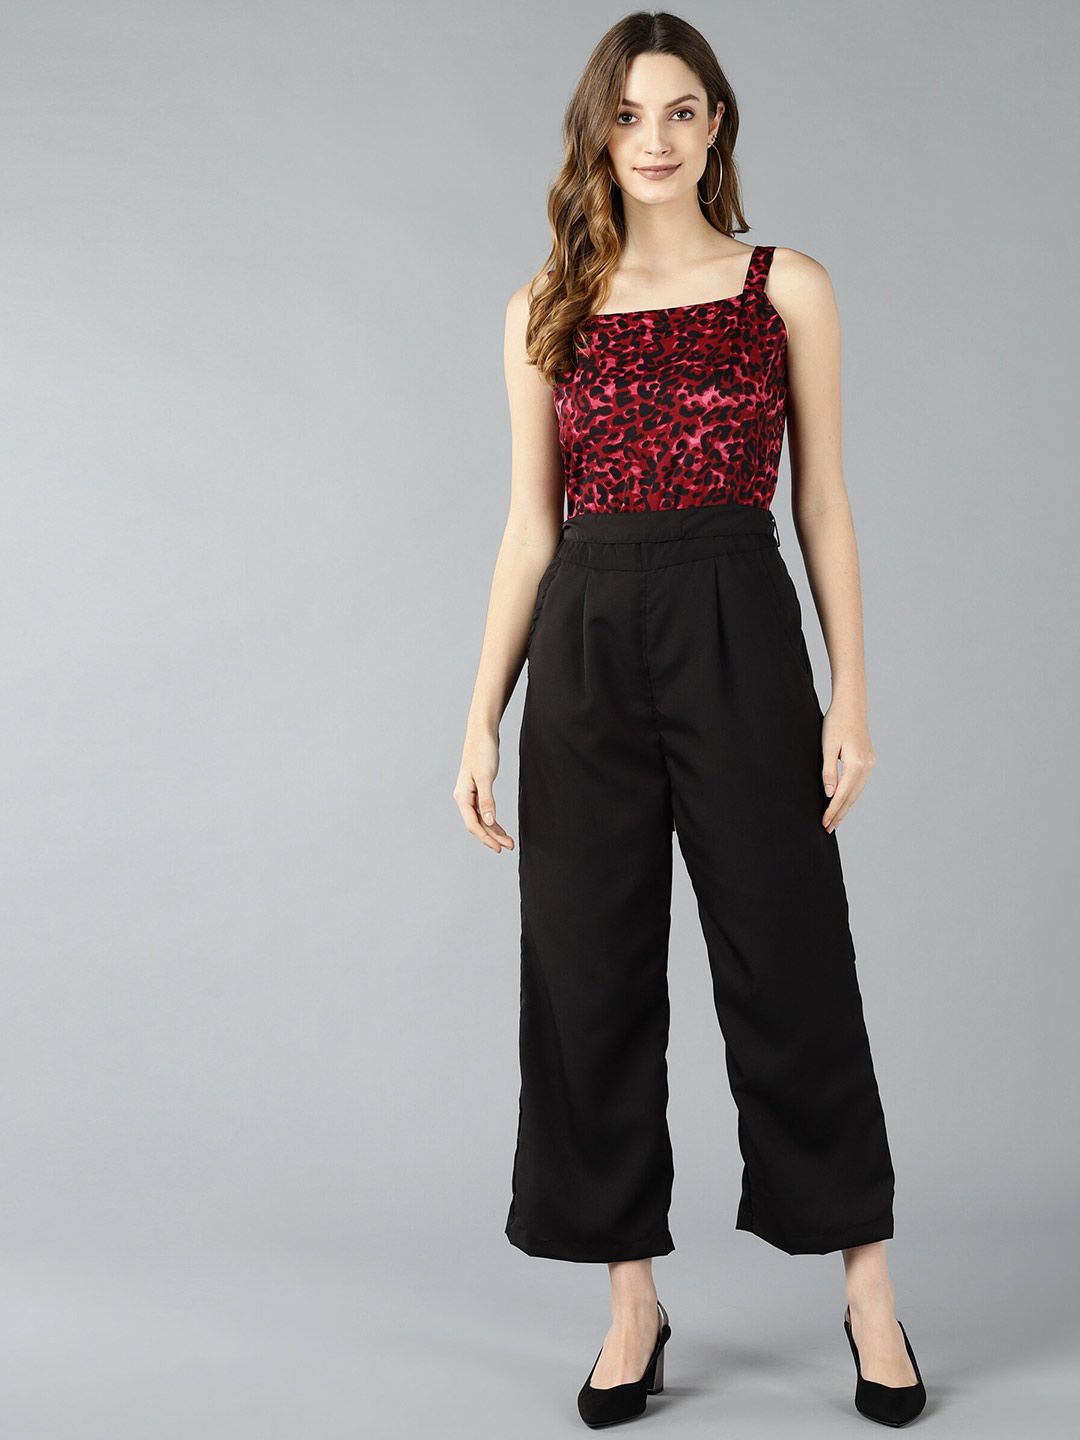 ZNX Clothing Black & Red Printed Basic Jumpsuit Price in India